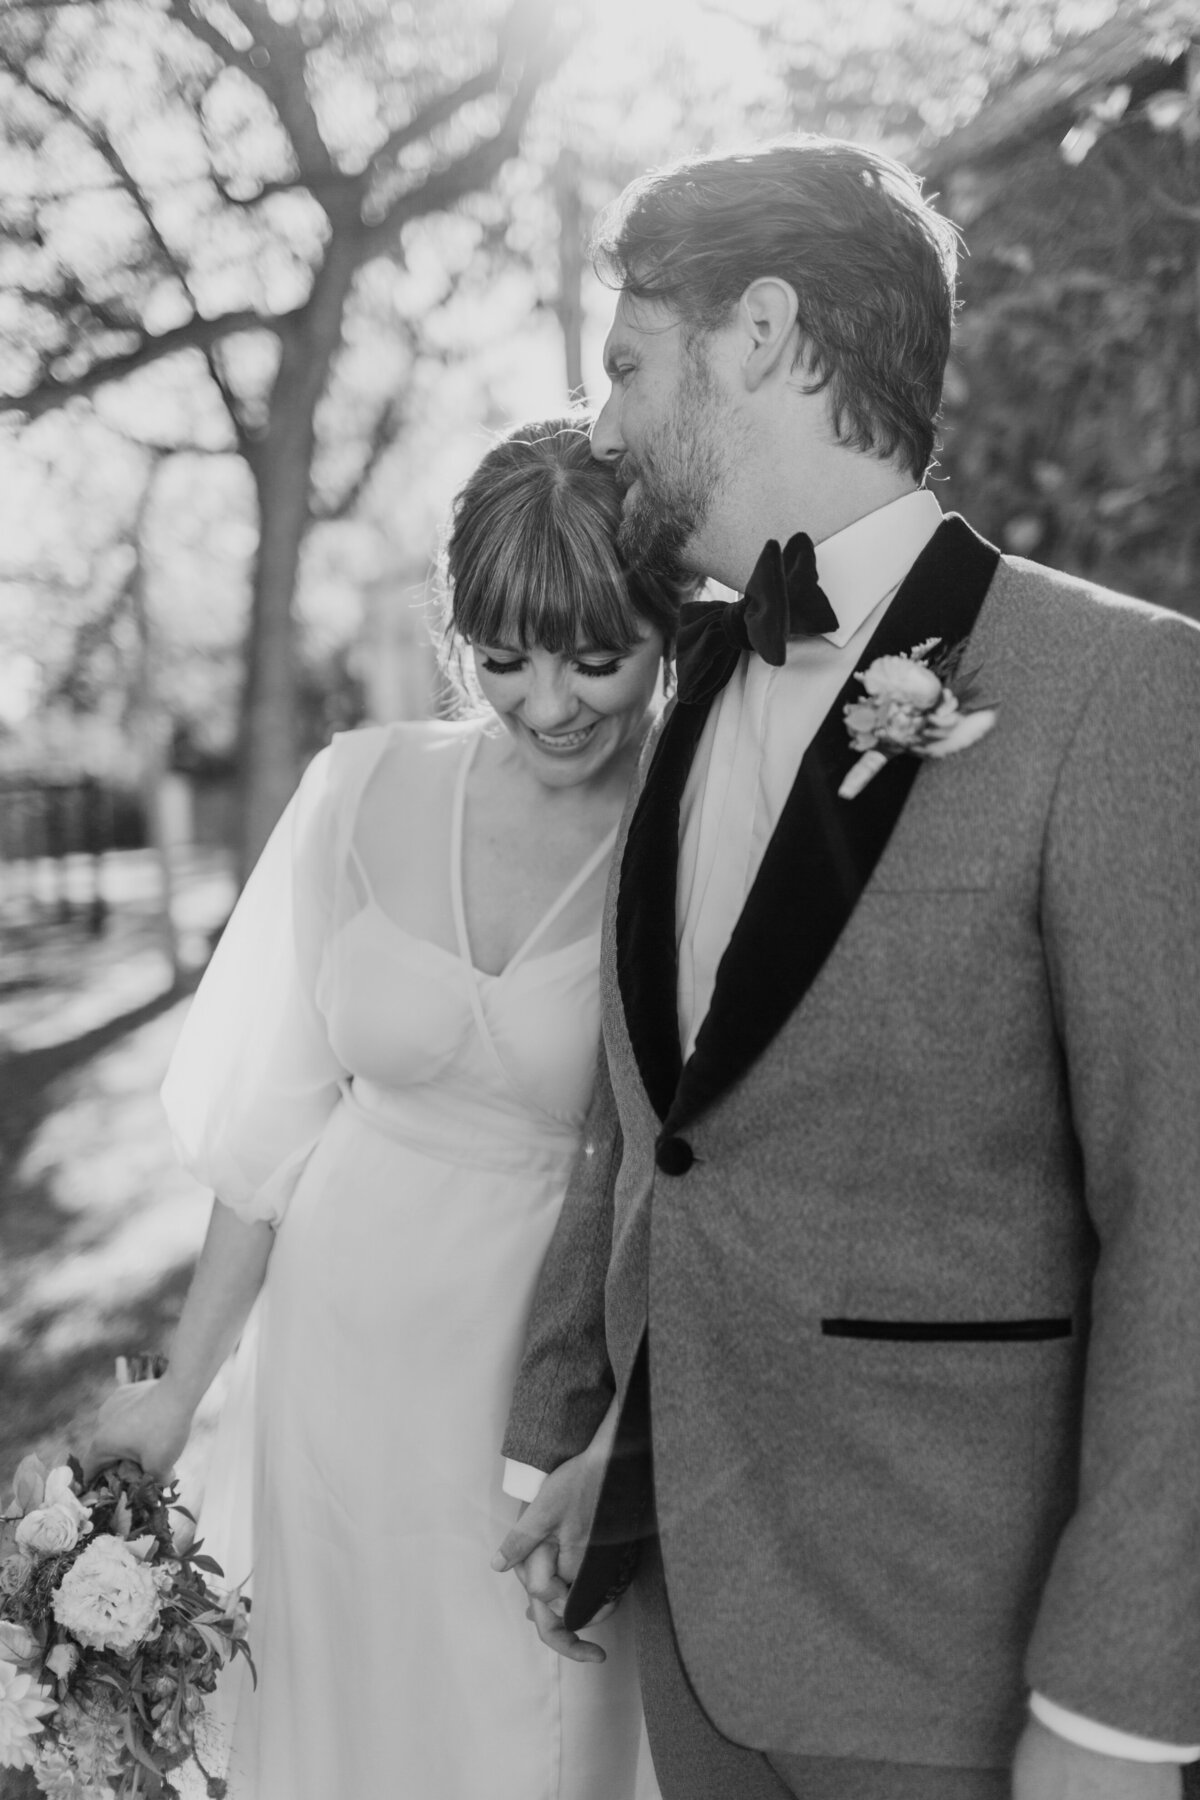 A sweet candid moment shared between a bride and groom captured by Fort Worth wedding photographer, Megan Christine Studio